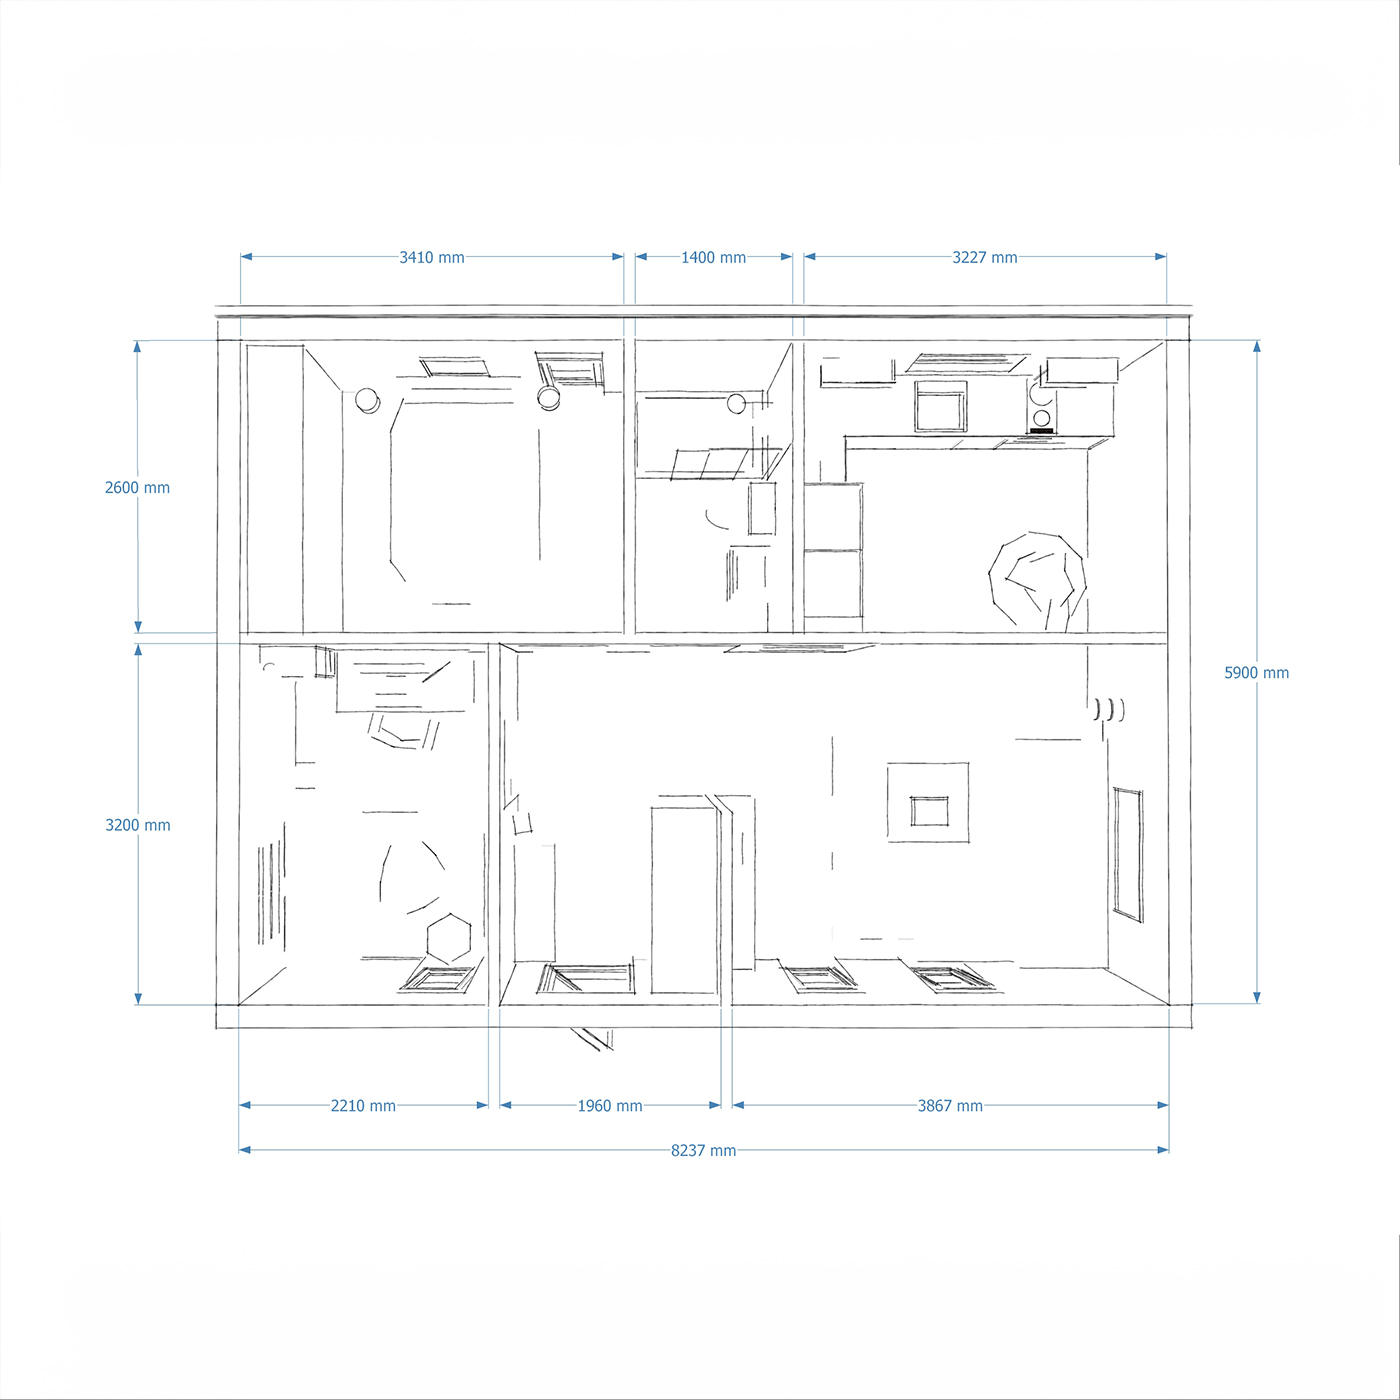 Interior dimensions for live-in garden room 6.2m by 8.6m